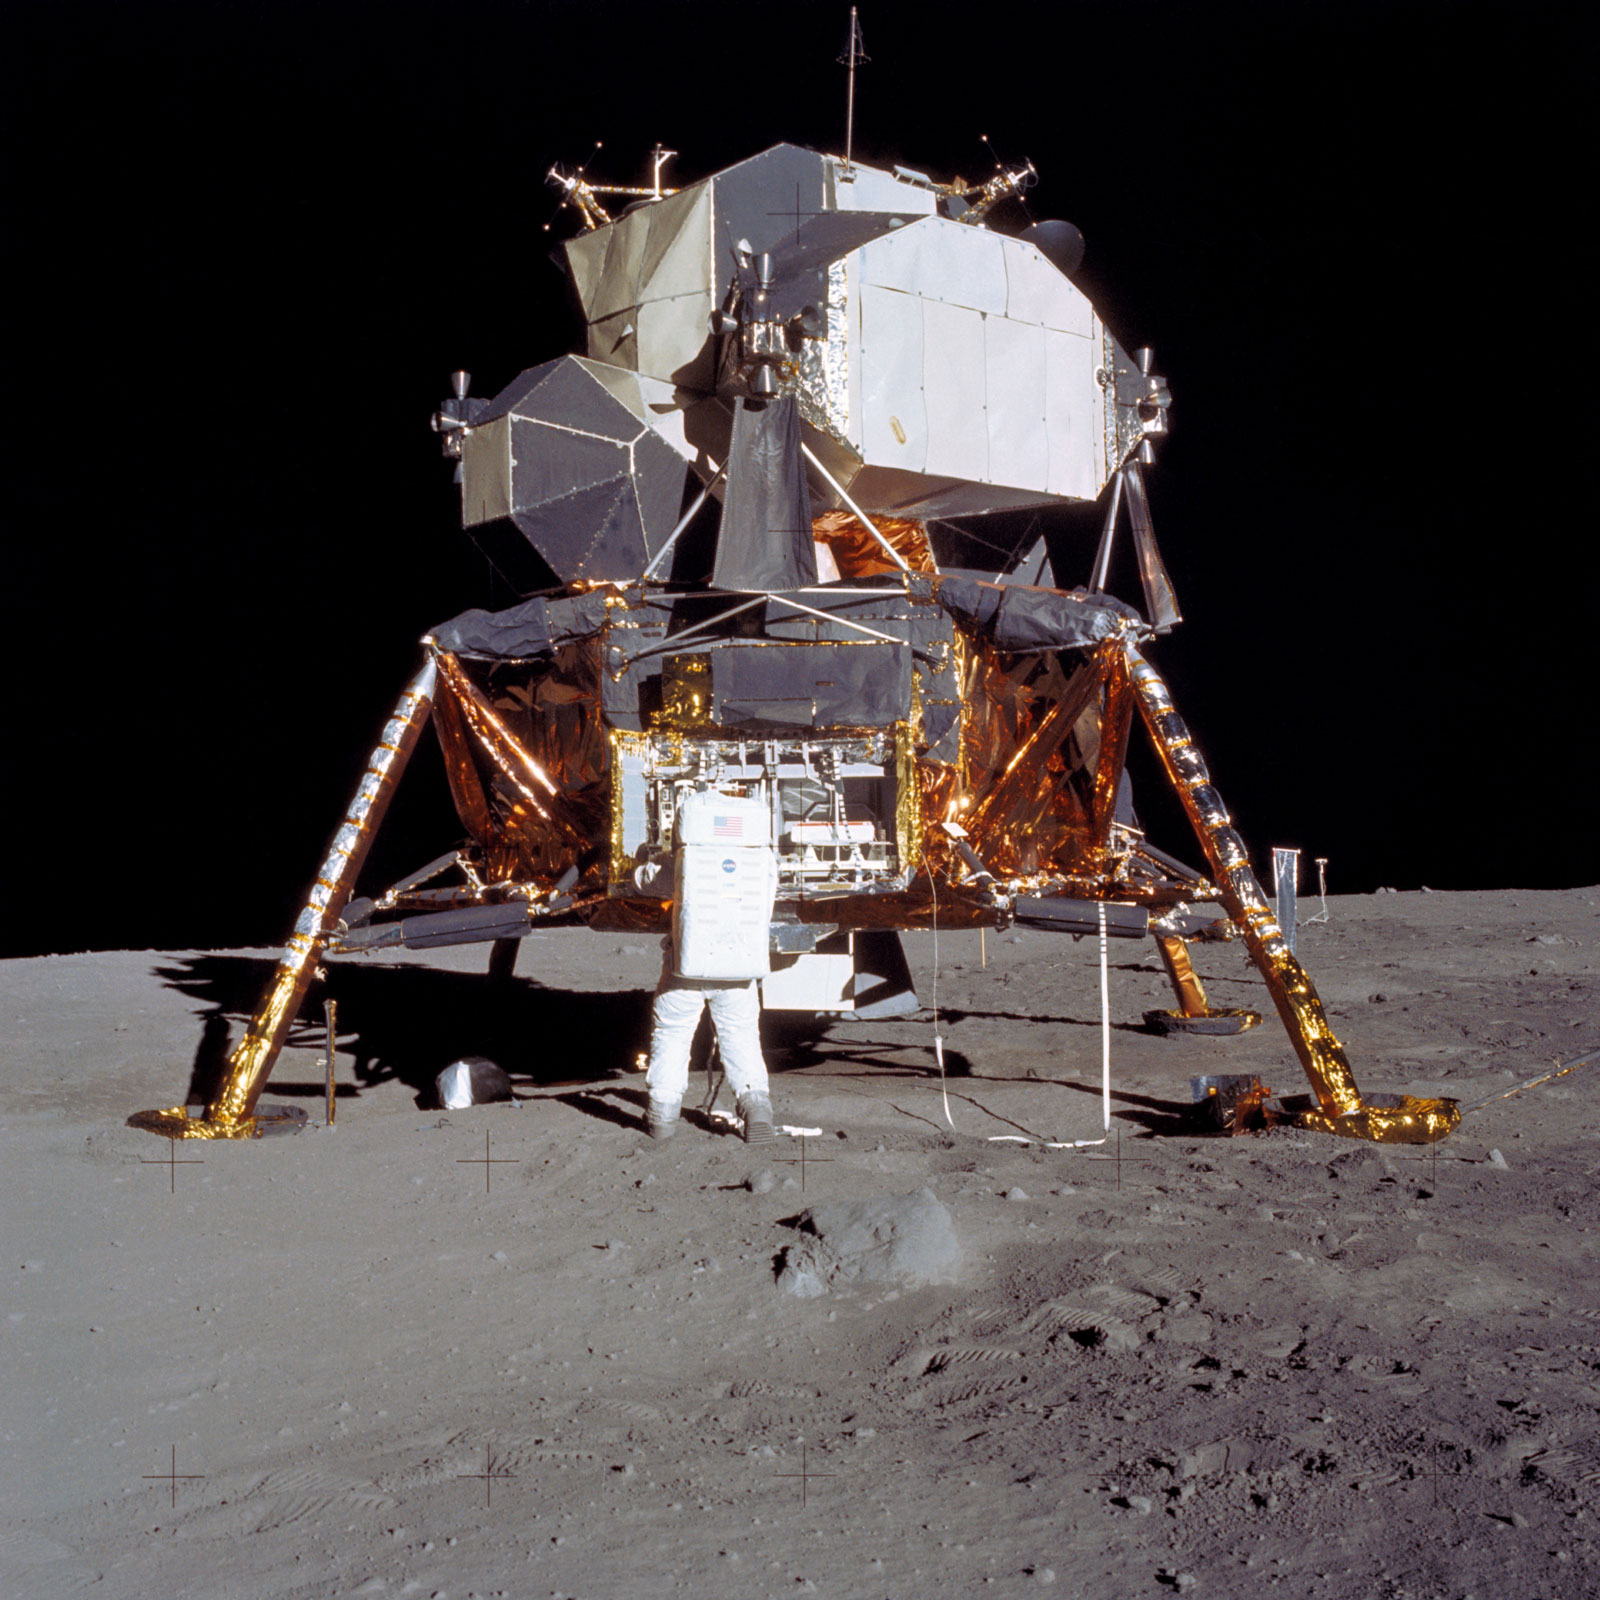 Astronaut standing outside the Apollo 11 Lunar Module on the Moon.